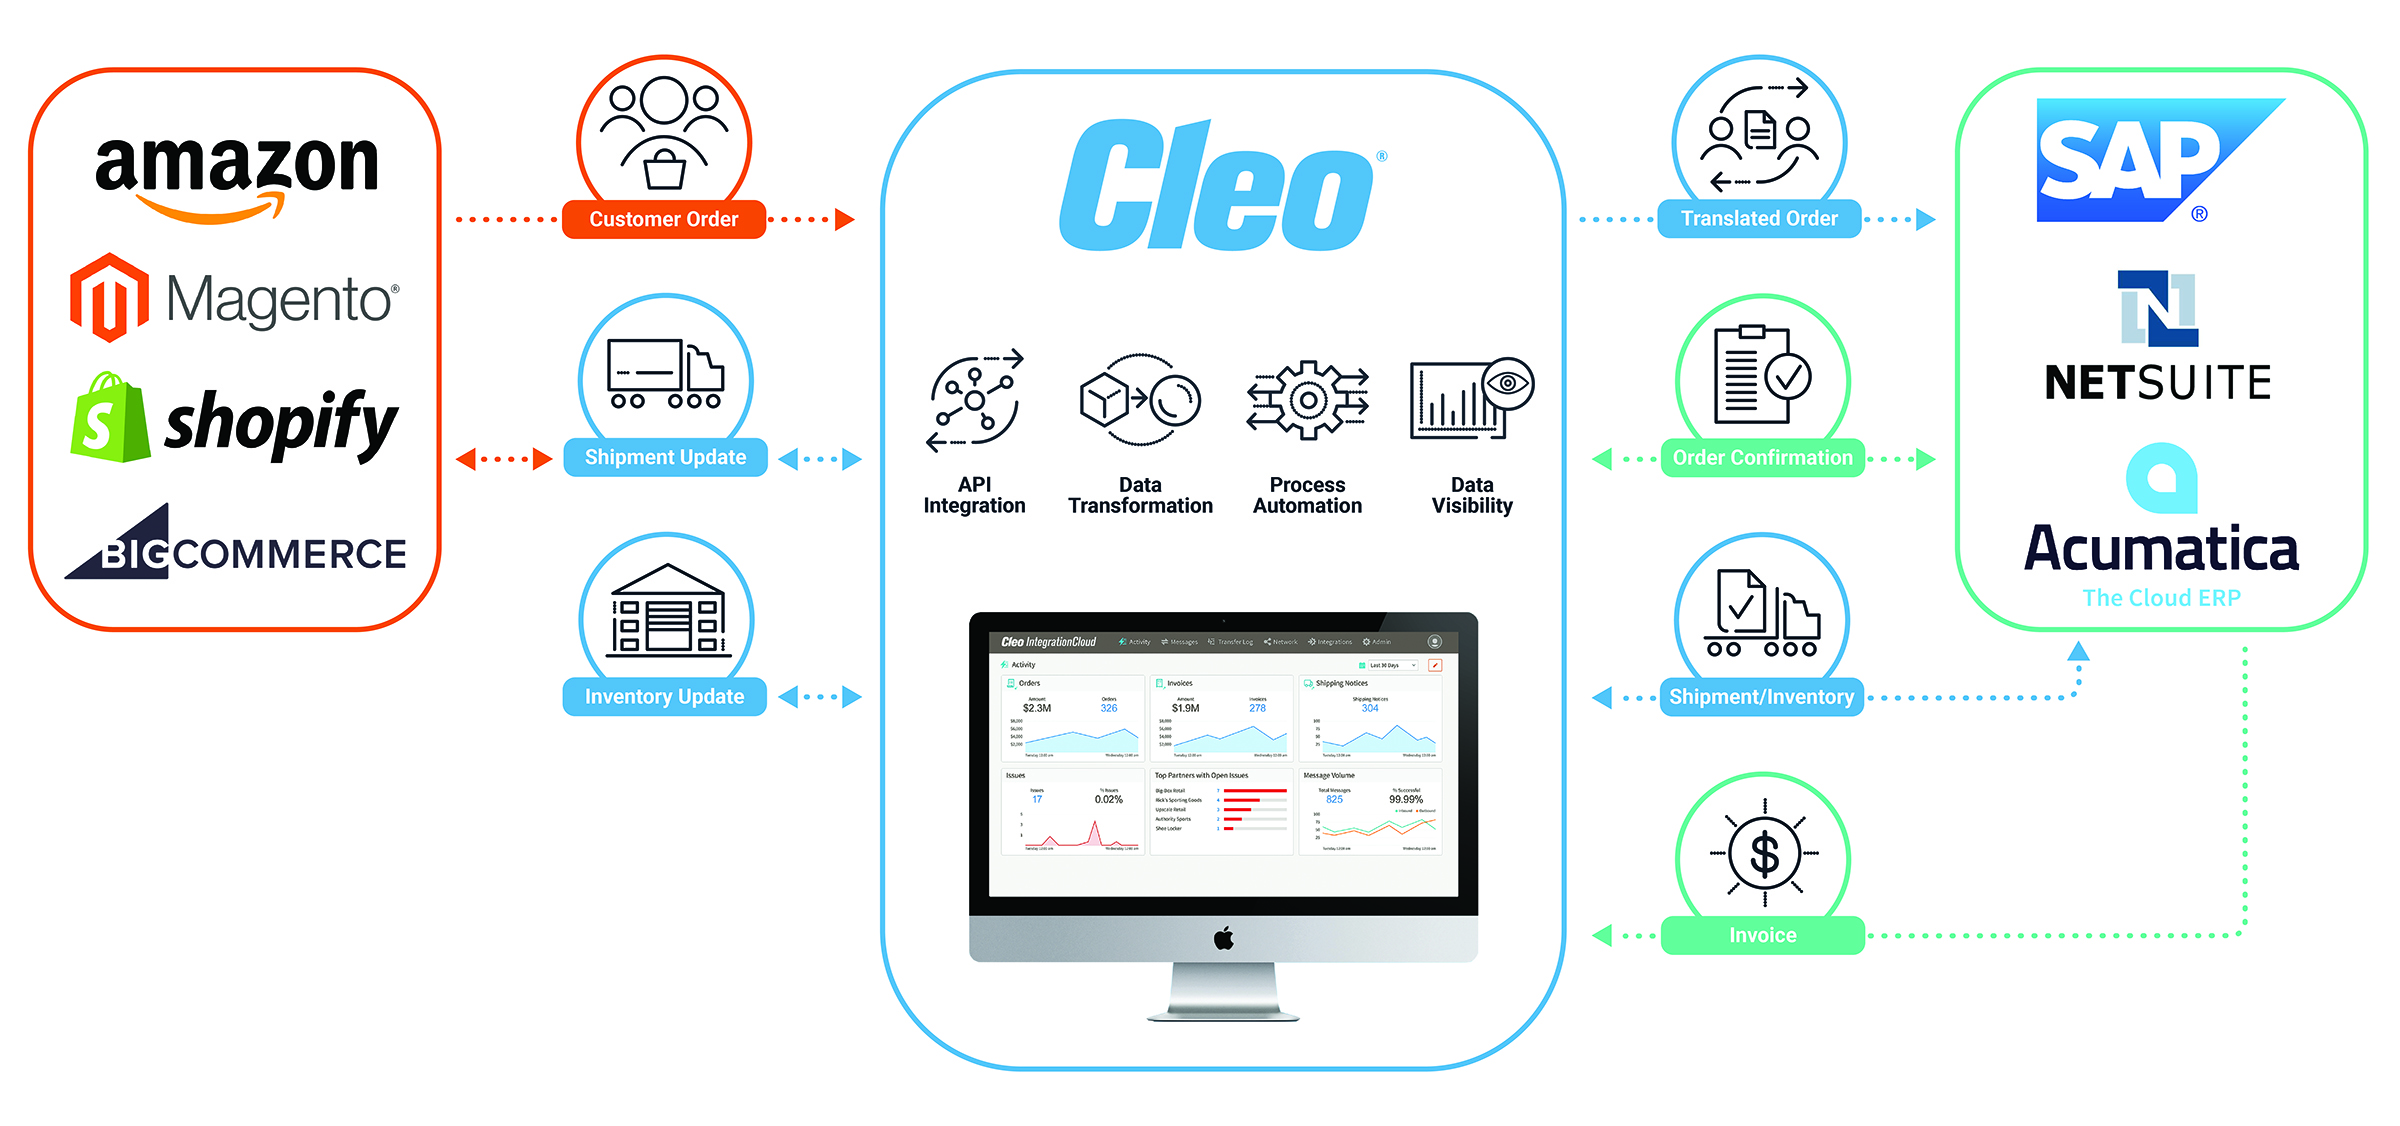 Recent updates to the Cleo Integration Cloud platform help companies seamlessly integrate eCommerce workflows and revenue streams.